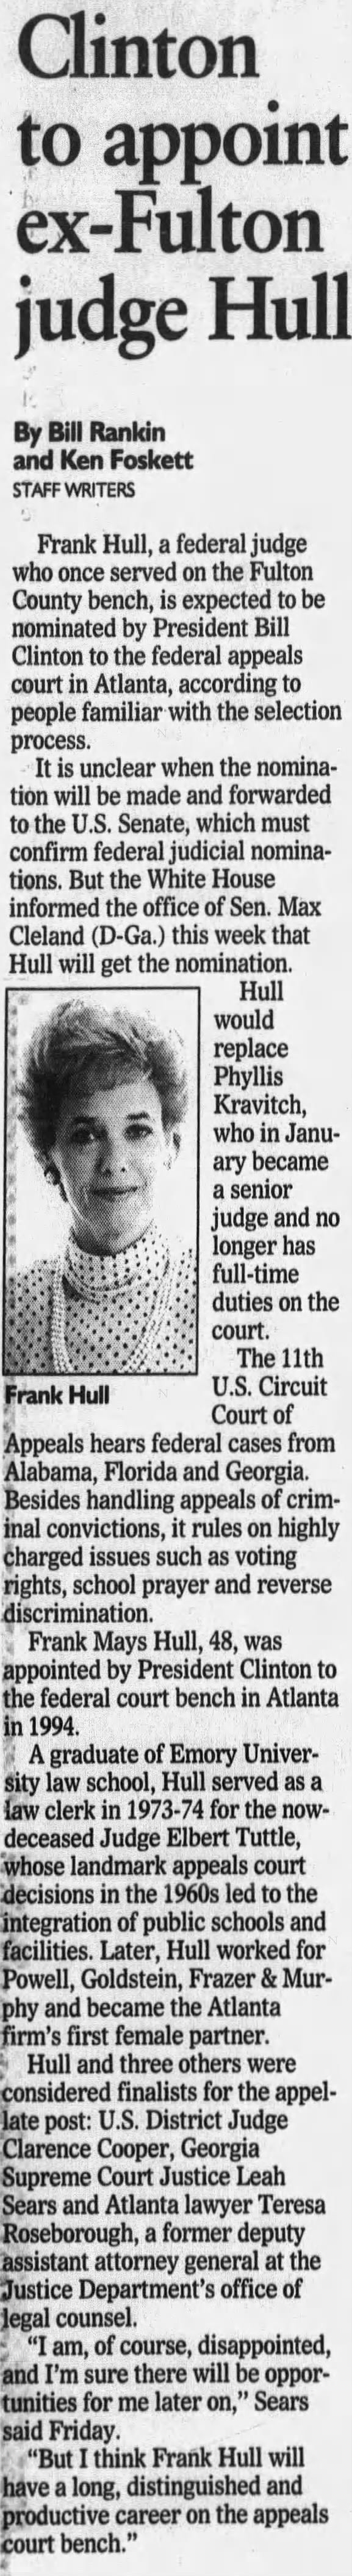 Clinton to appoint ex-Fulton judge Hull